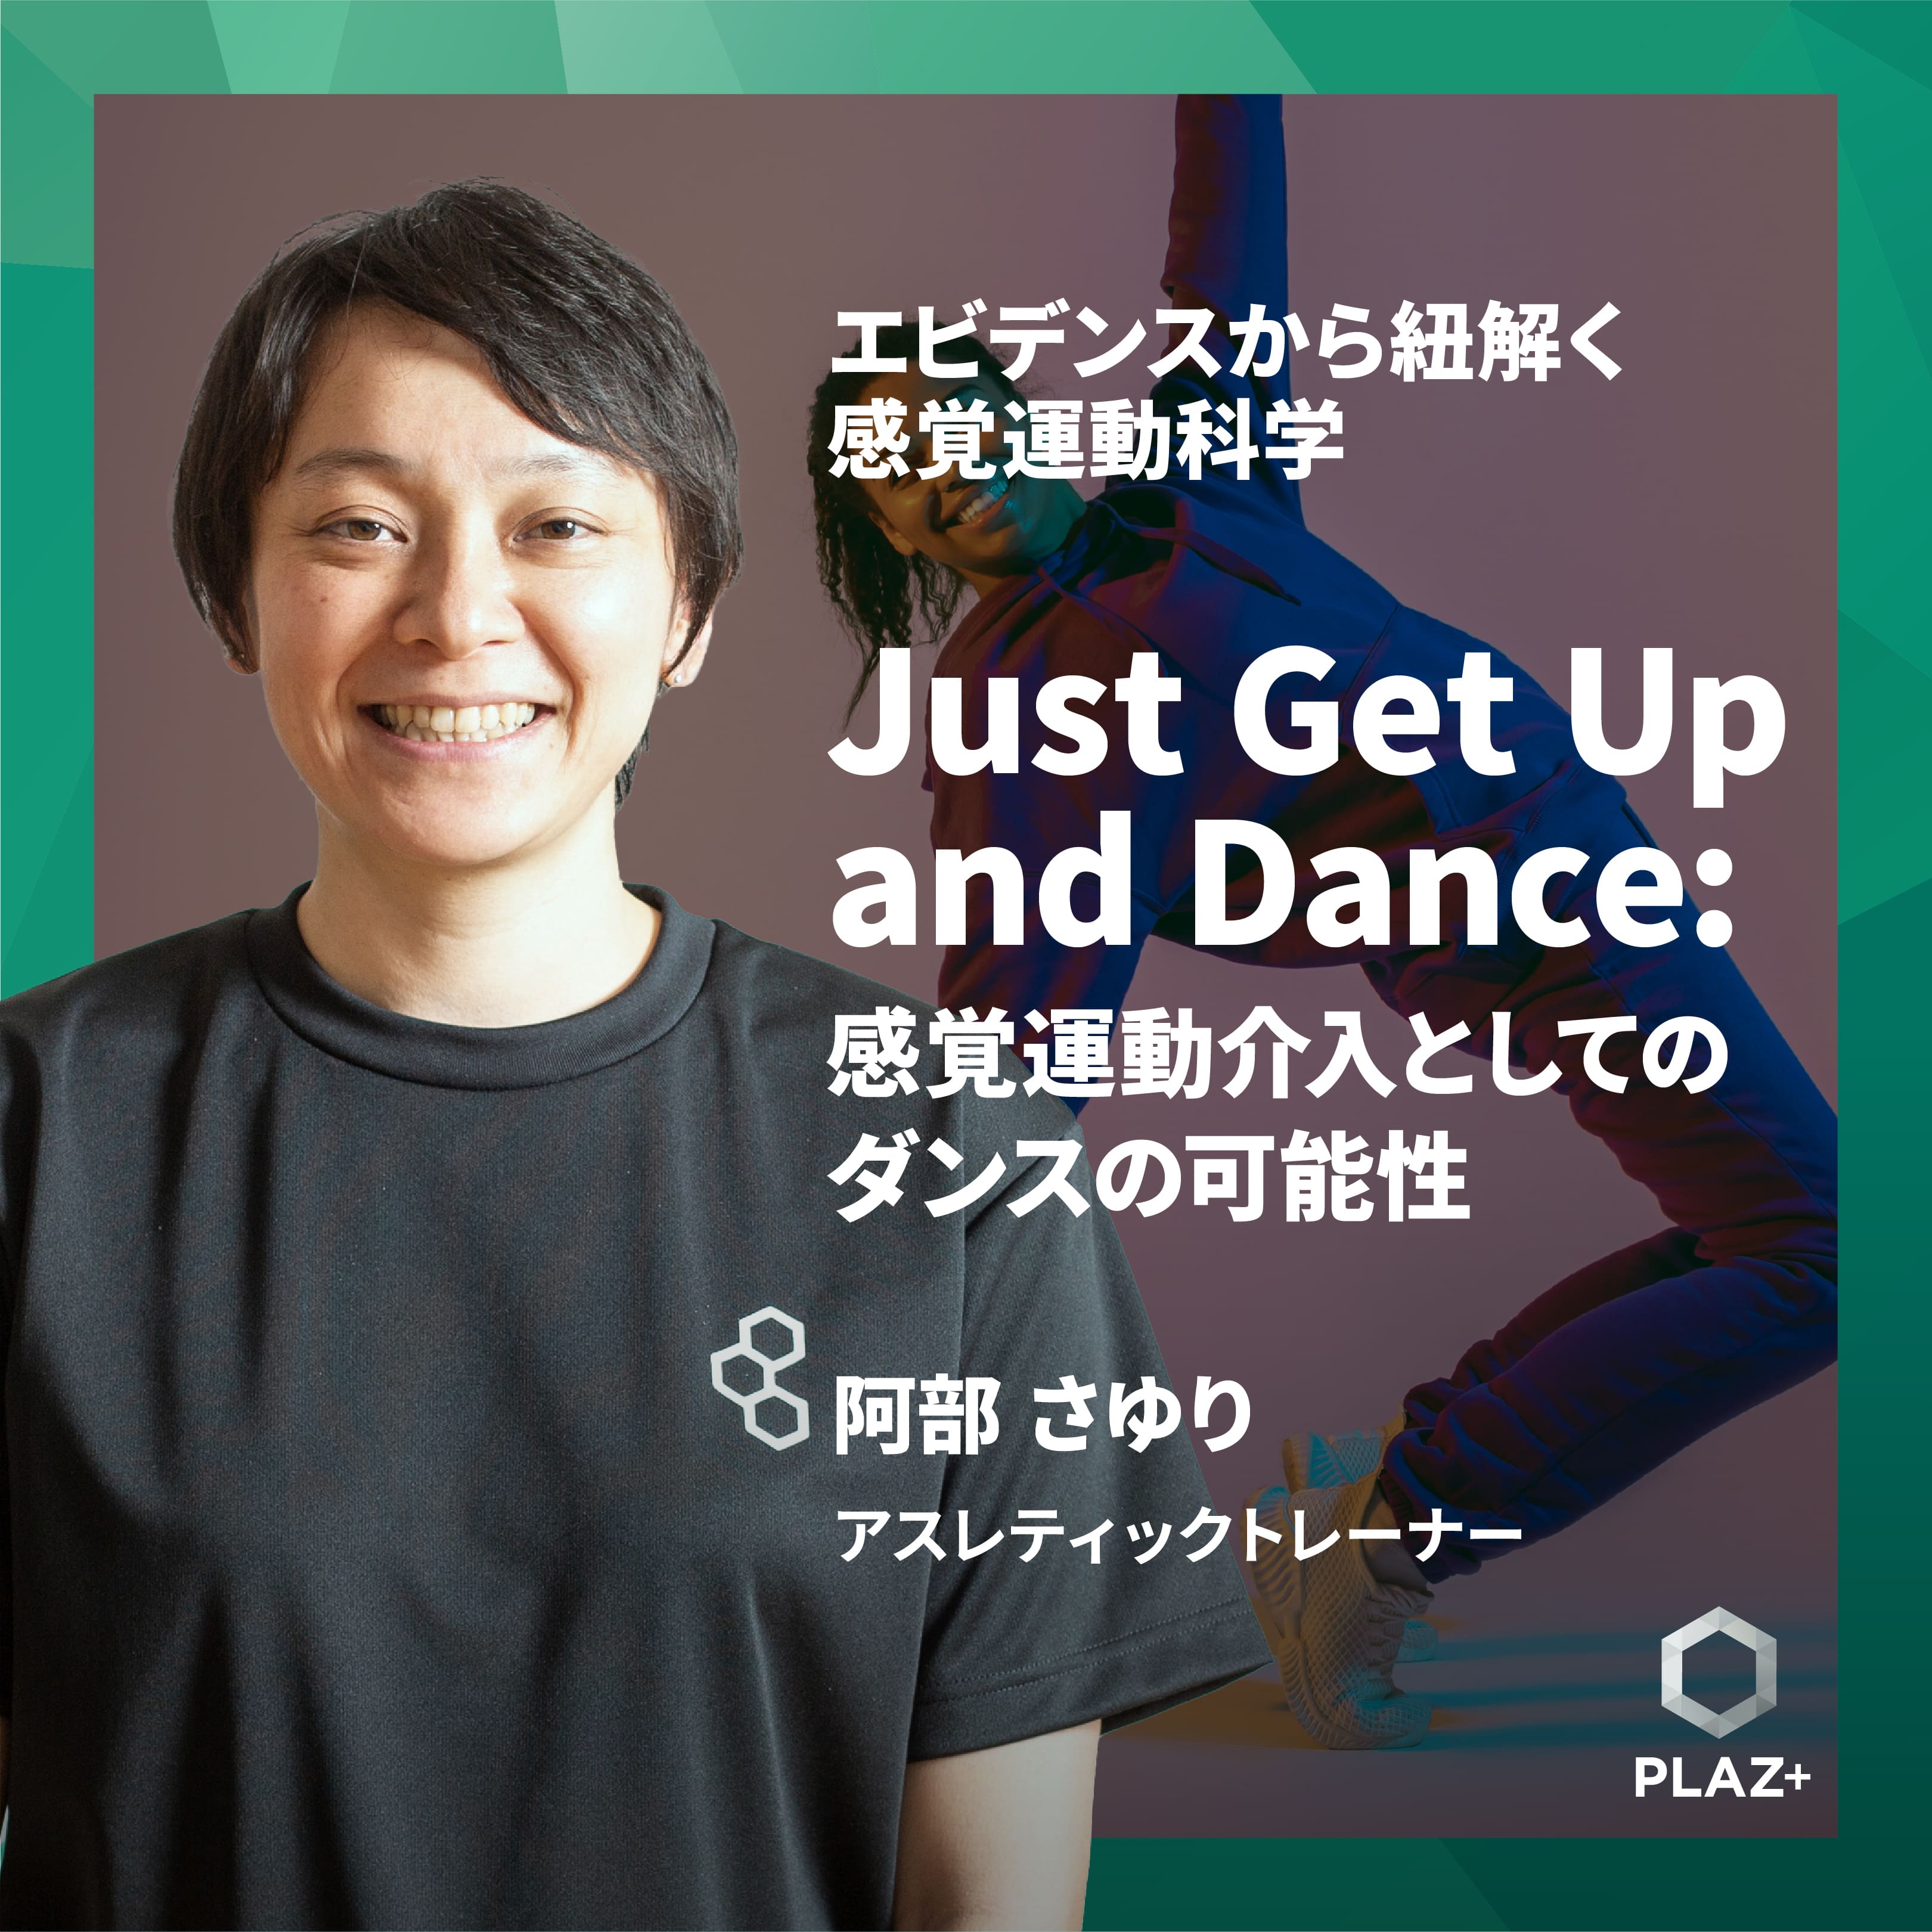 Just Get Up and Dance: 感覚運動介入としてのダンスの可能性